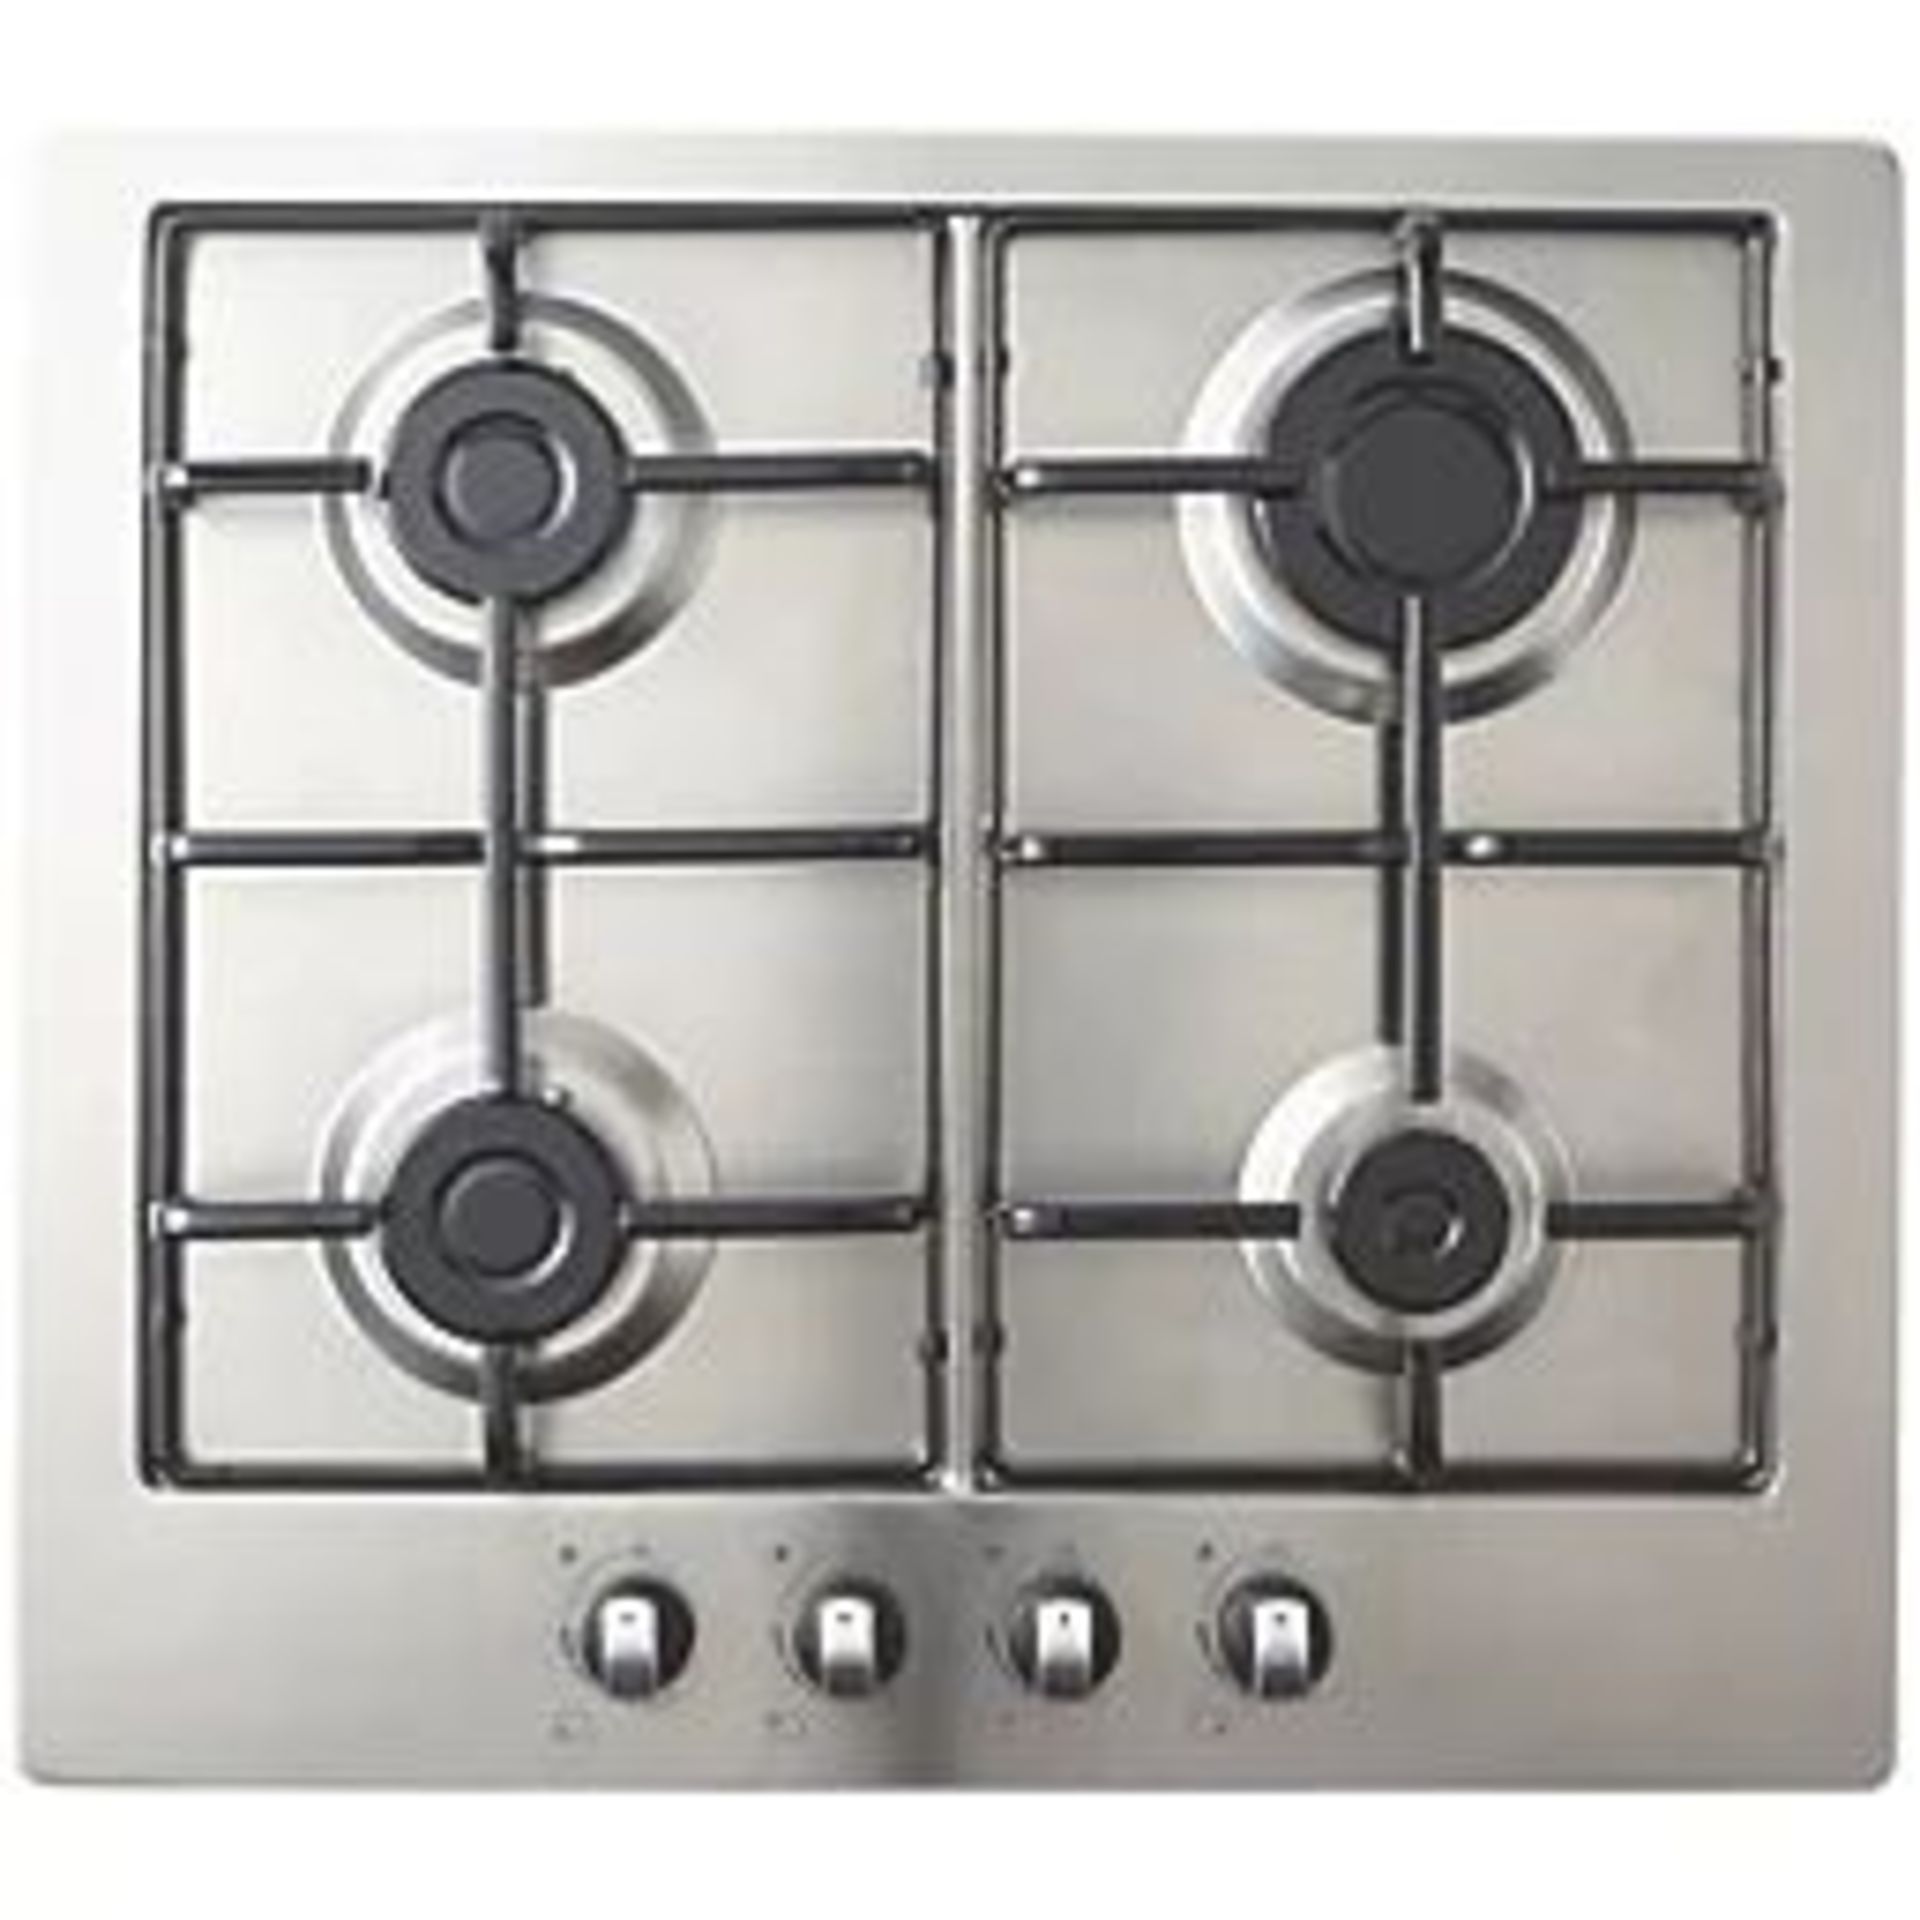 COOKE & LEWIS GAS HOB STAINLESS STEEL 58CM. -R14.13.